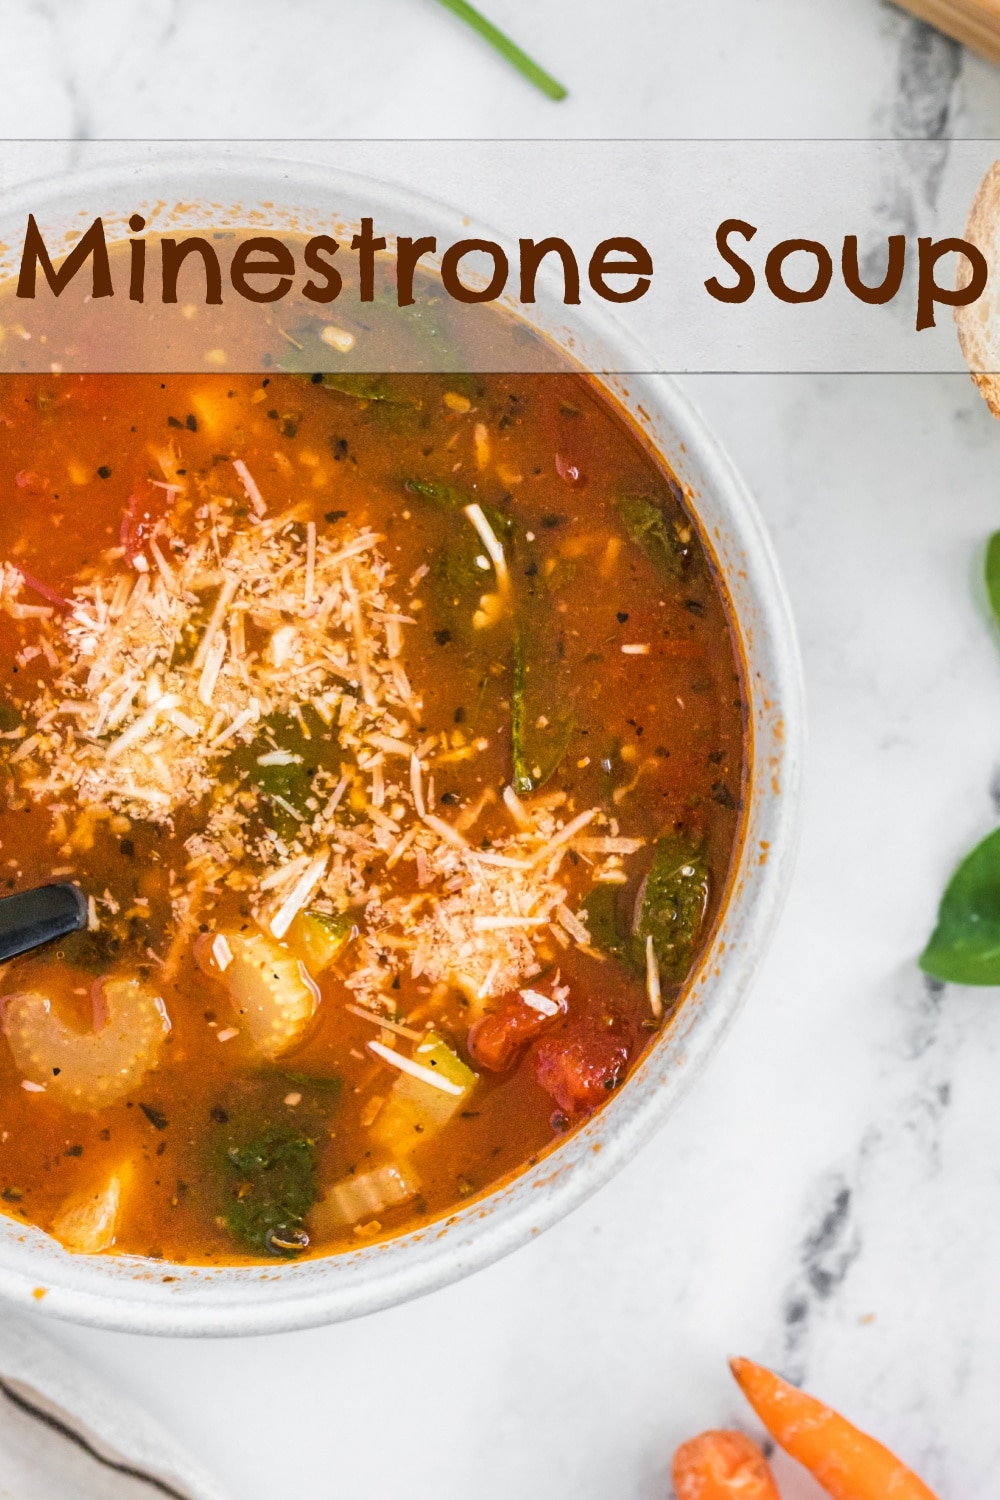 Cold, winter days call for a steaming-hot bowl of minestrone soup, with its tomato-herb broth and variety of vegetables and hearty beans.  via @cmpollak1